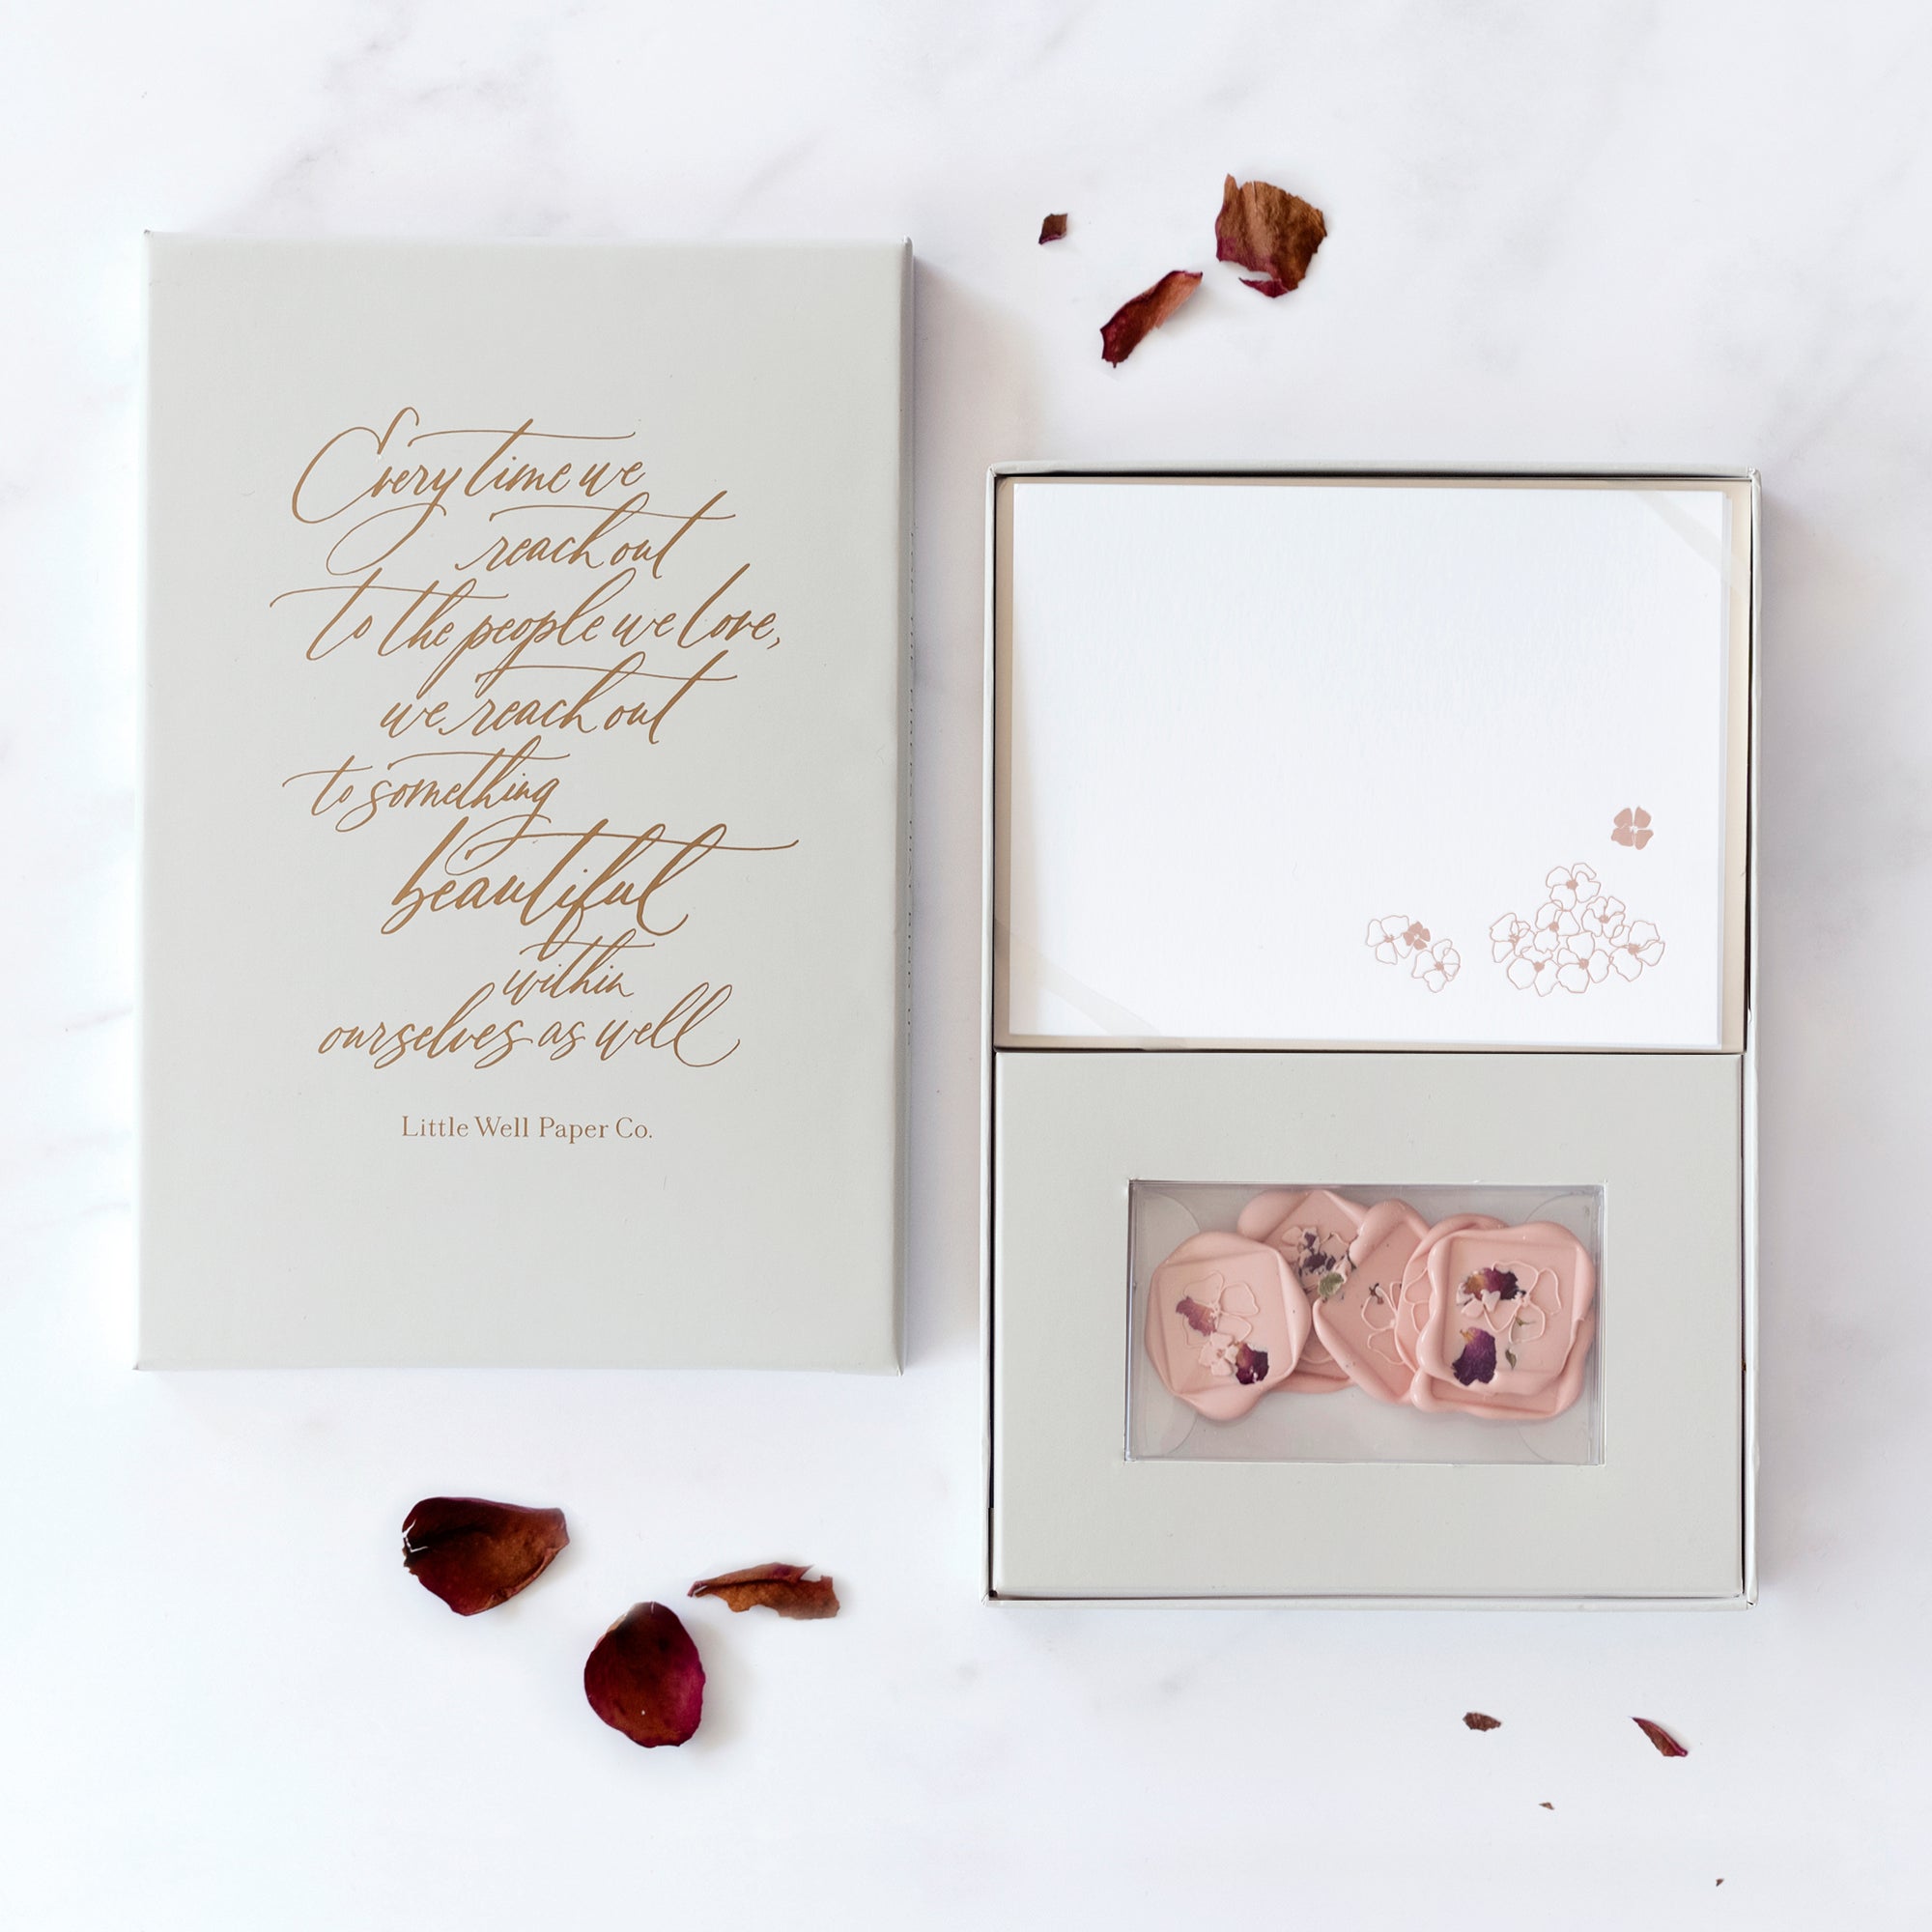 Our "Rose Petal" flat note stationery set includes a set of 6 hand printed cards and envelopes with 6 professional grade, self adhesive wax seals.